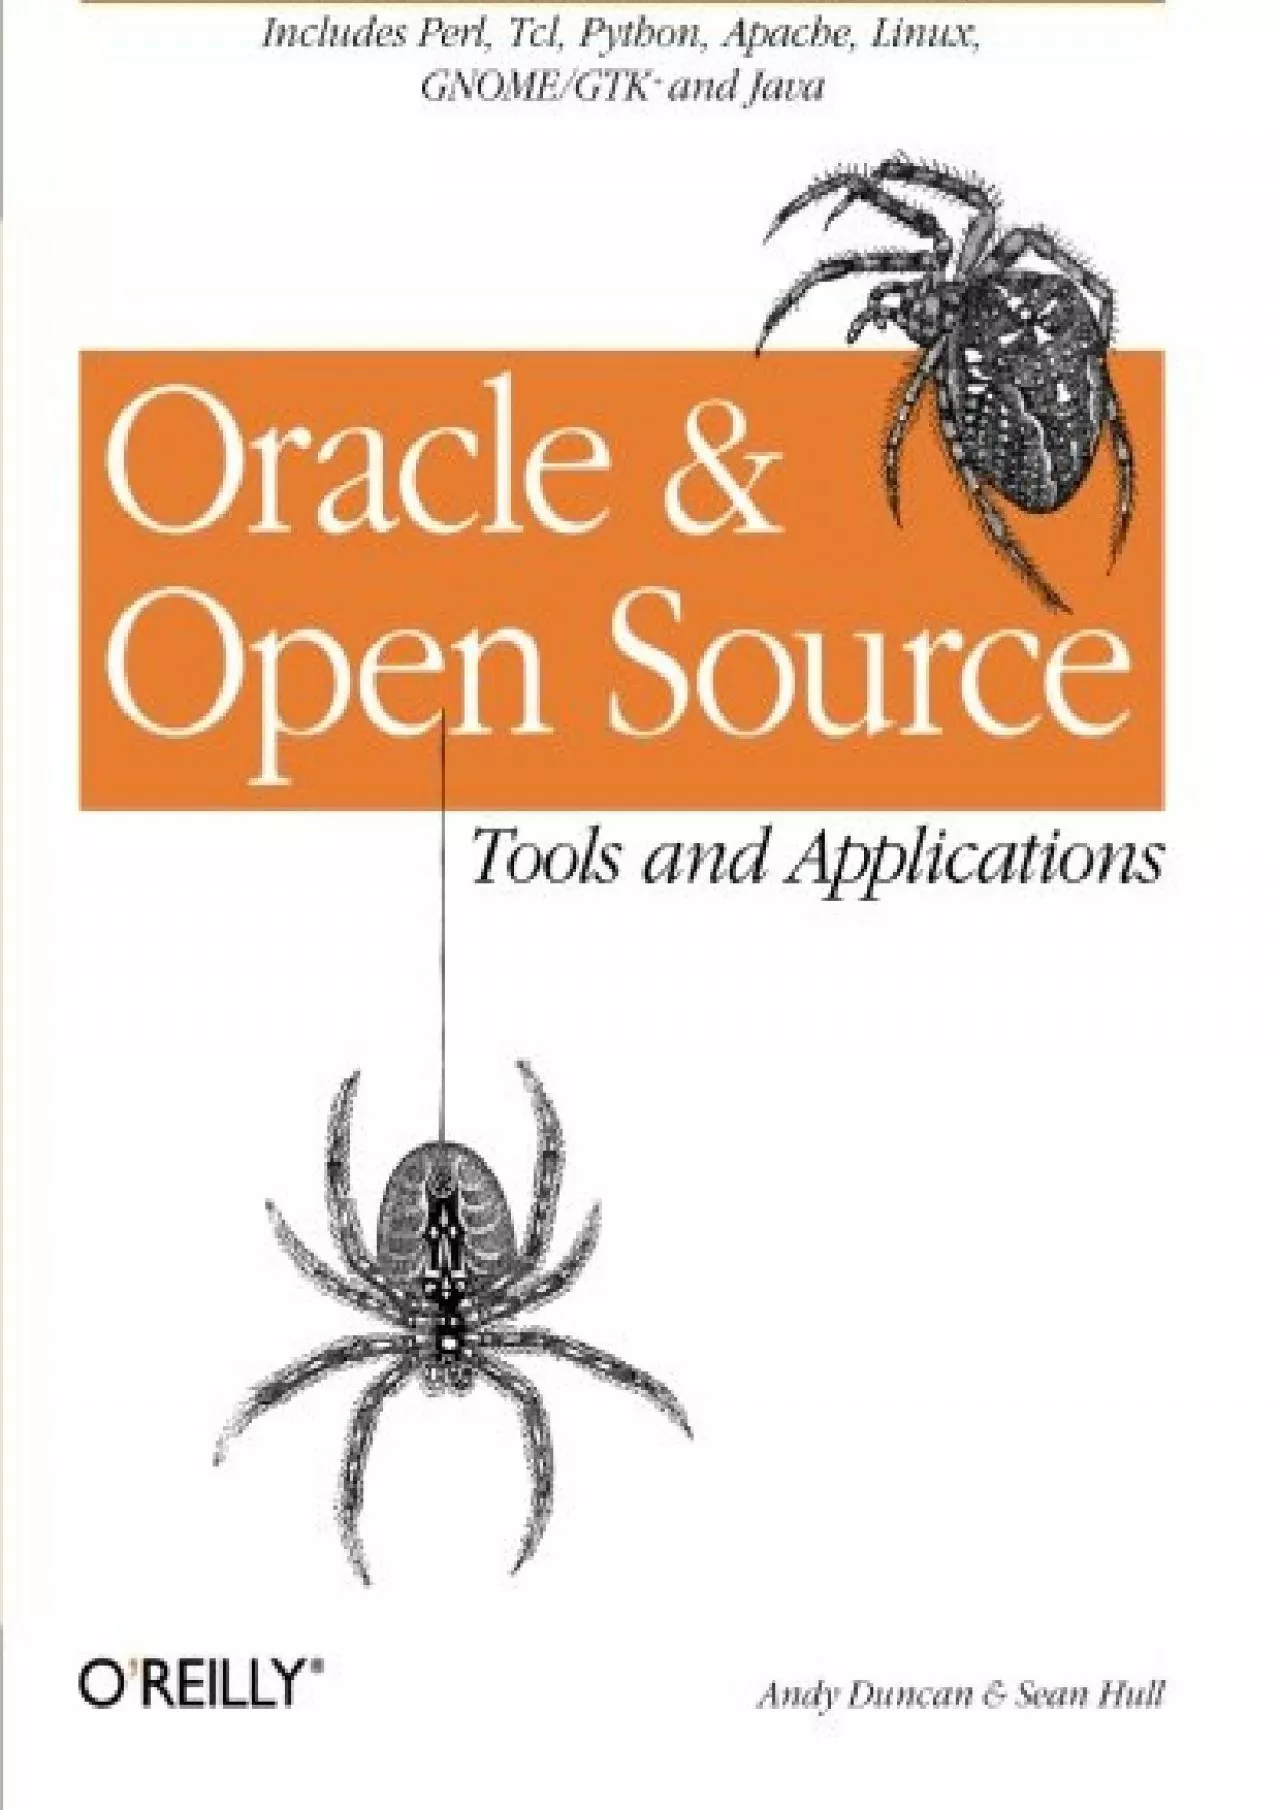 [READING BOOK]-Oracle and Open Source: Includes Perl, Linux, Tcl, Python, Apache, Java